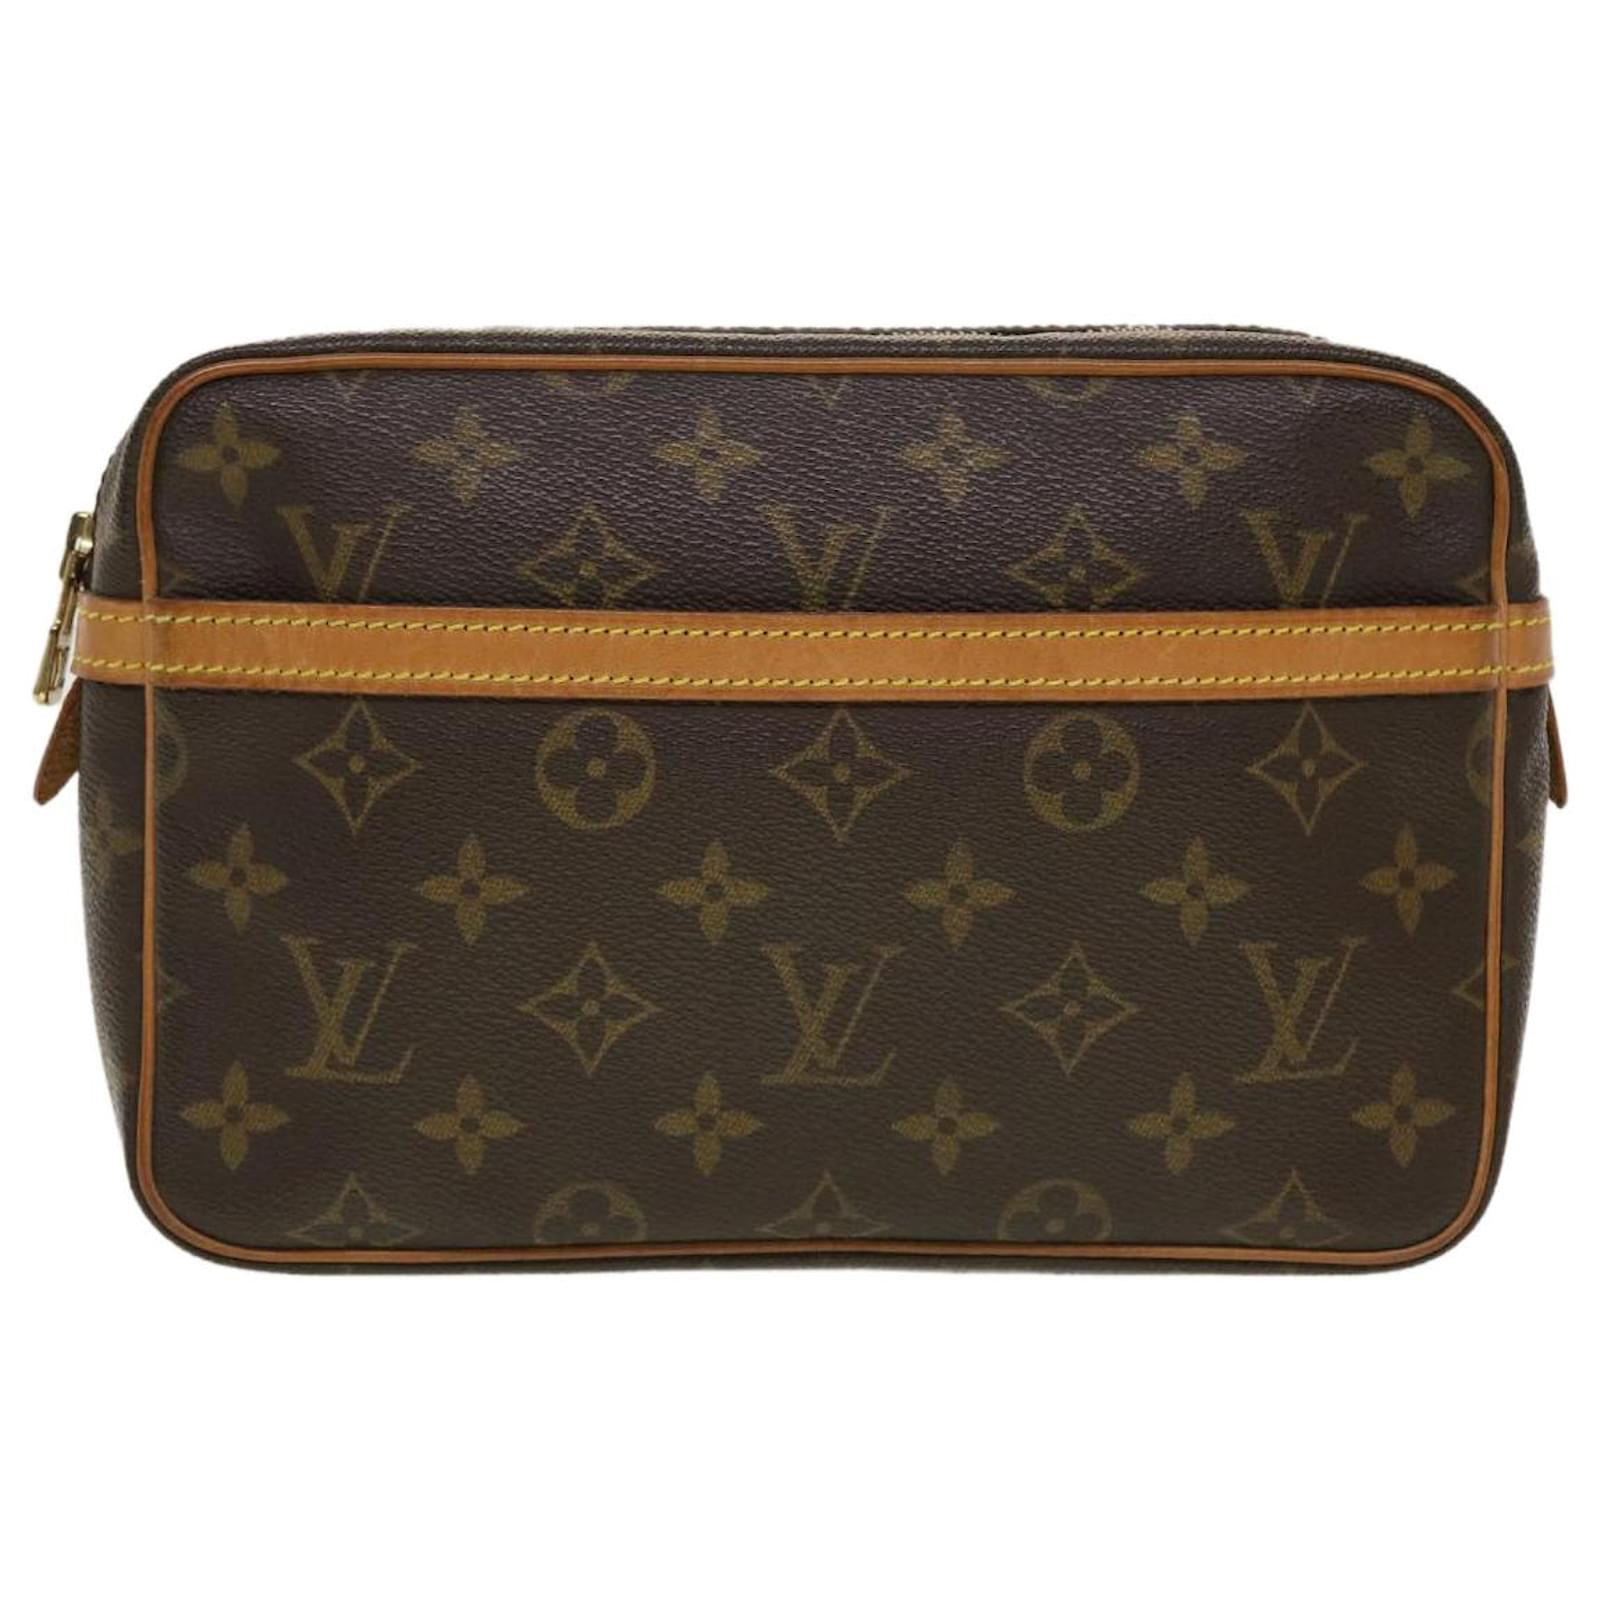 Louis Vuitton Pre-Owned Monogram Daily Pouch Clutch Bag - Brown